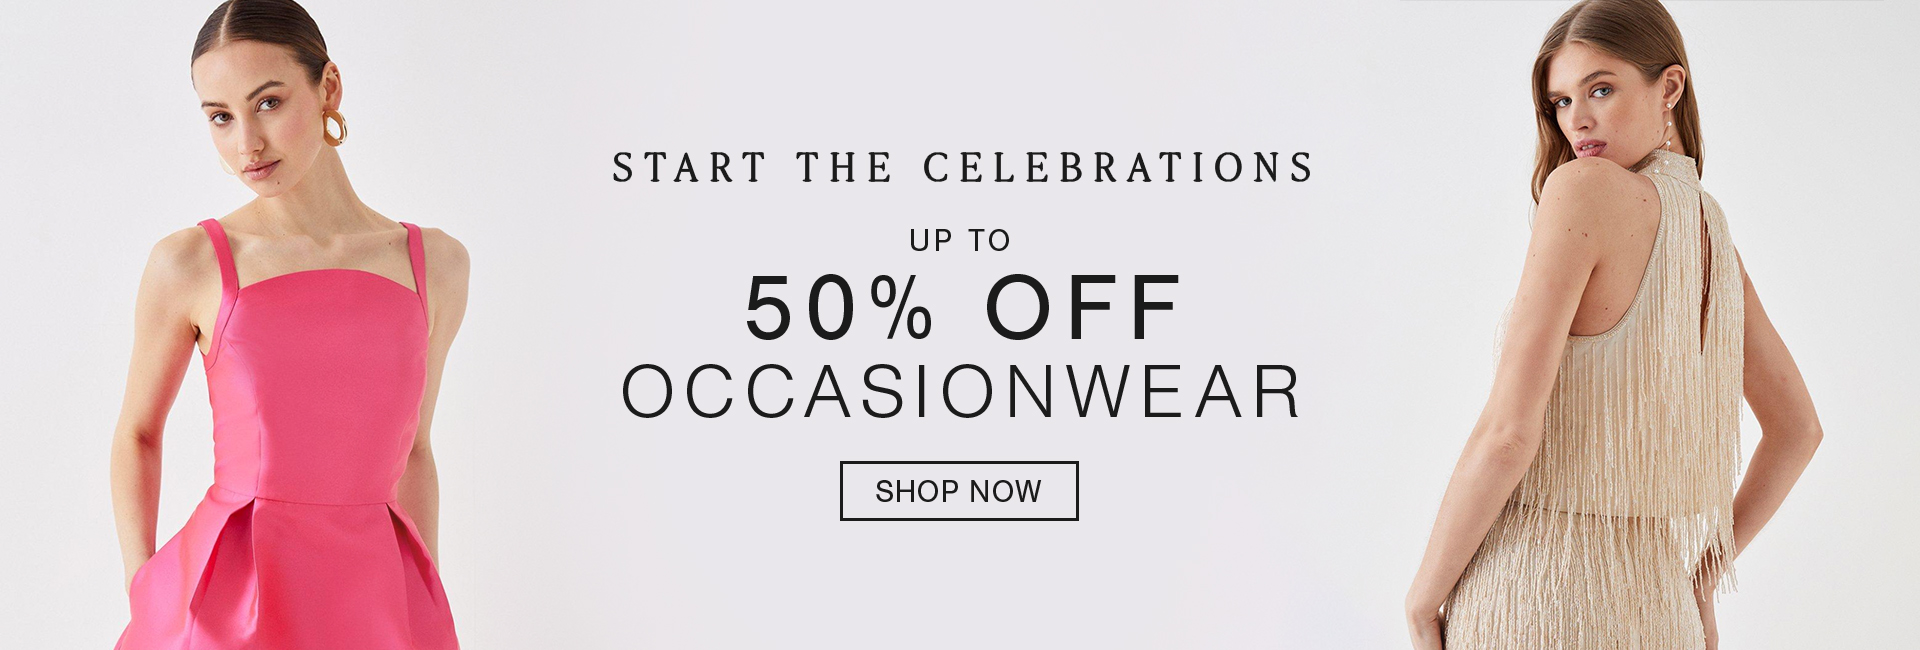 Up To 50% Off Occasionwear